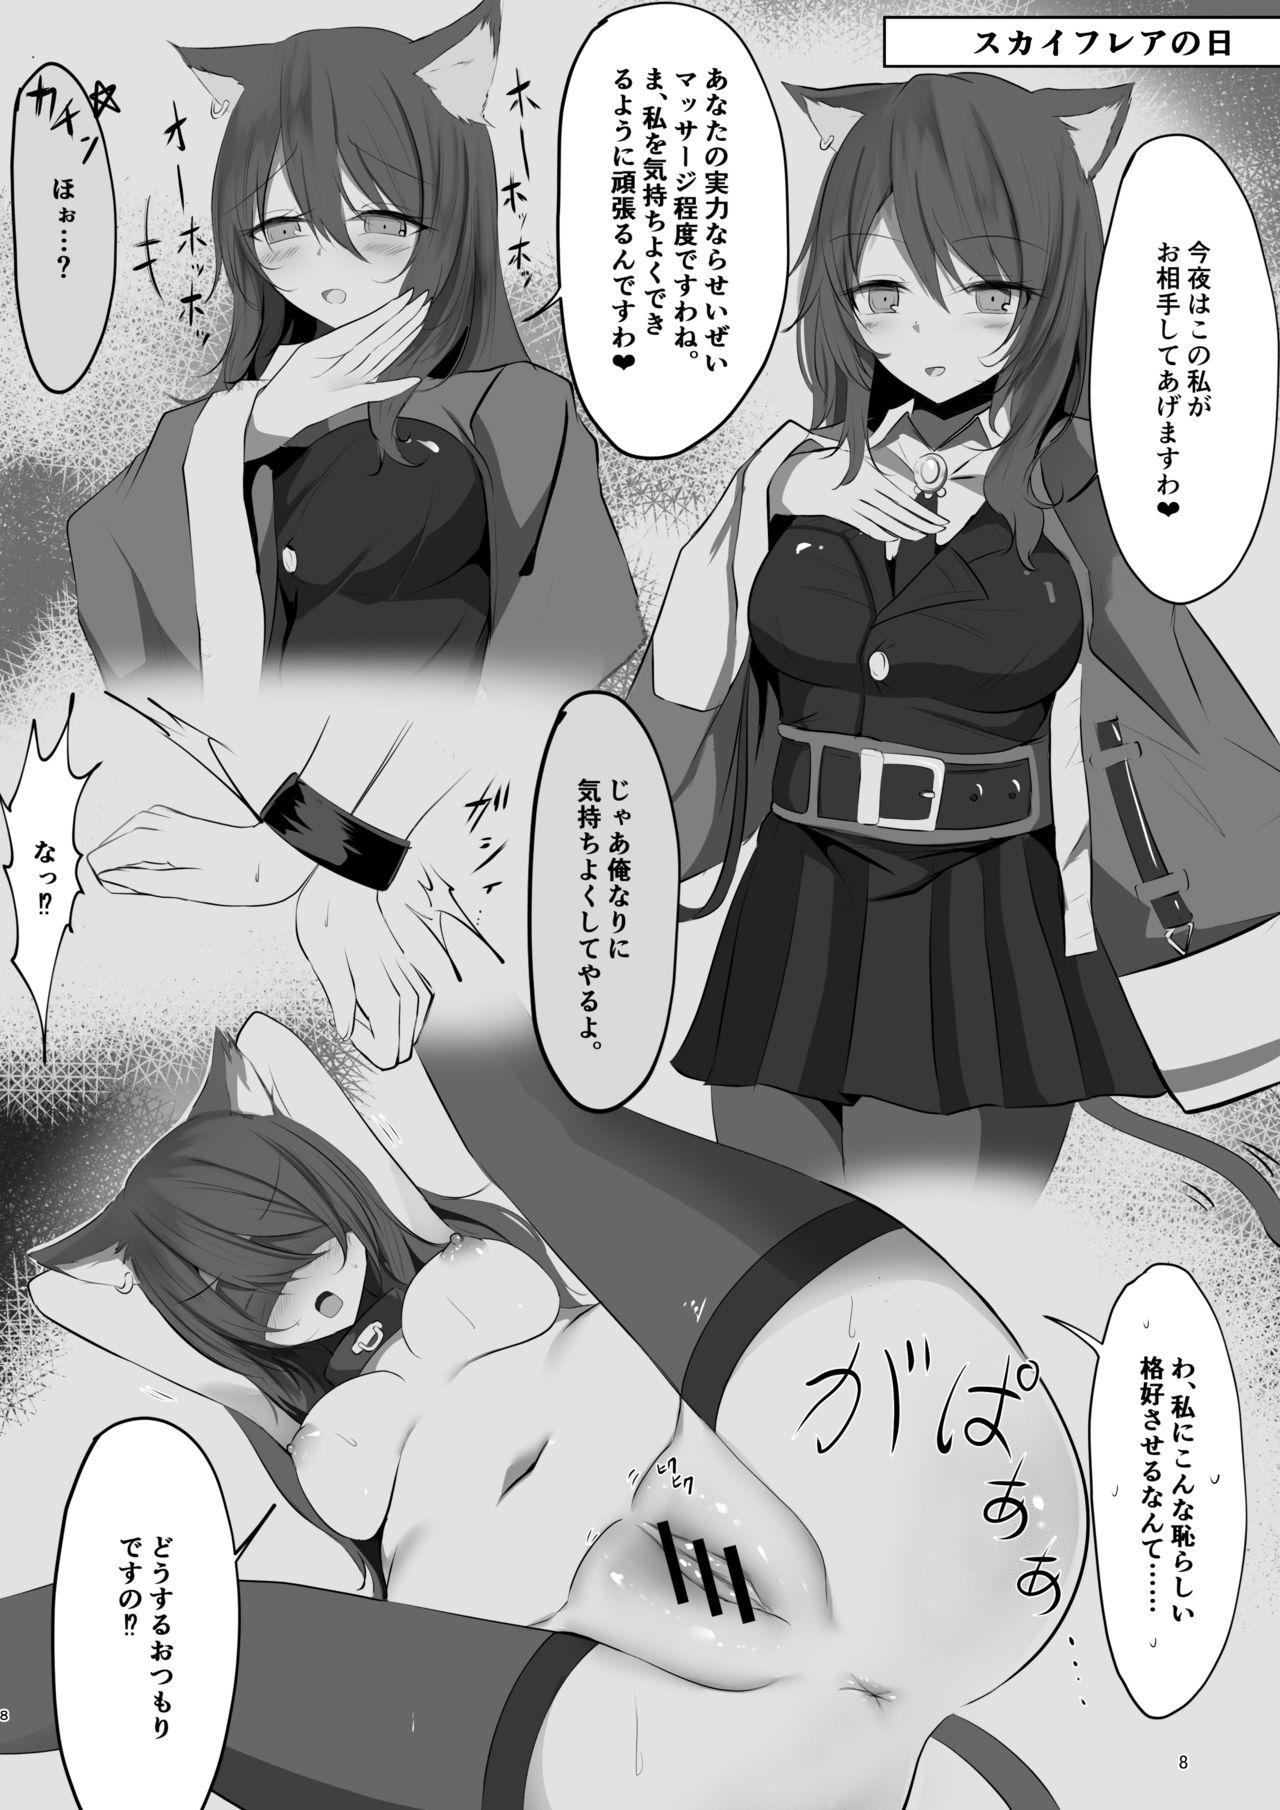 Hard Core Sex 夜な夜な扇情作戦記録 - Arknights Solo Female - Page 8